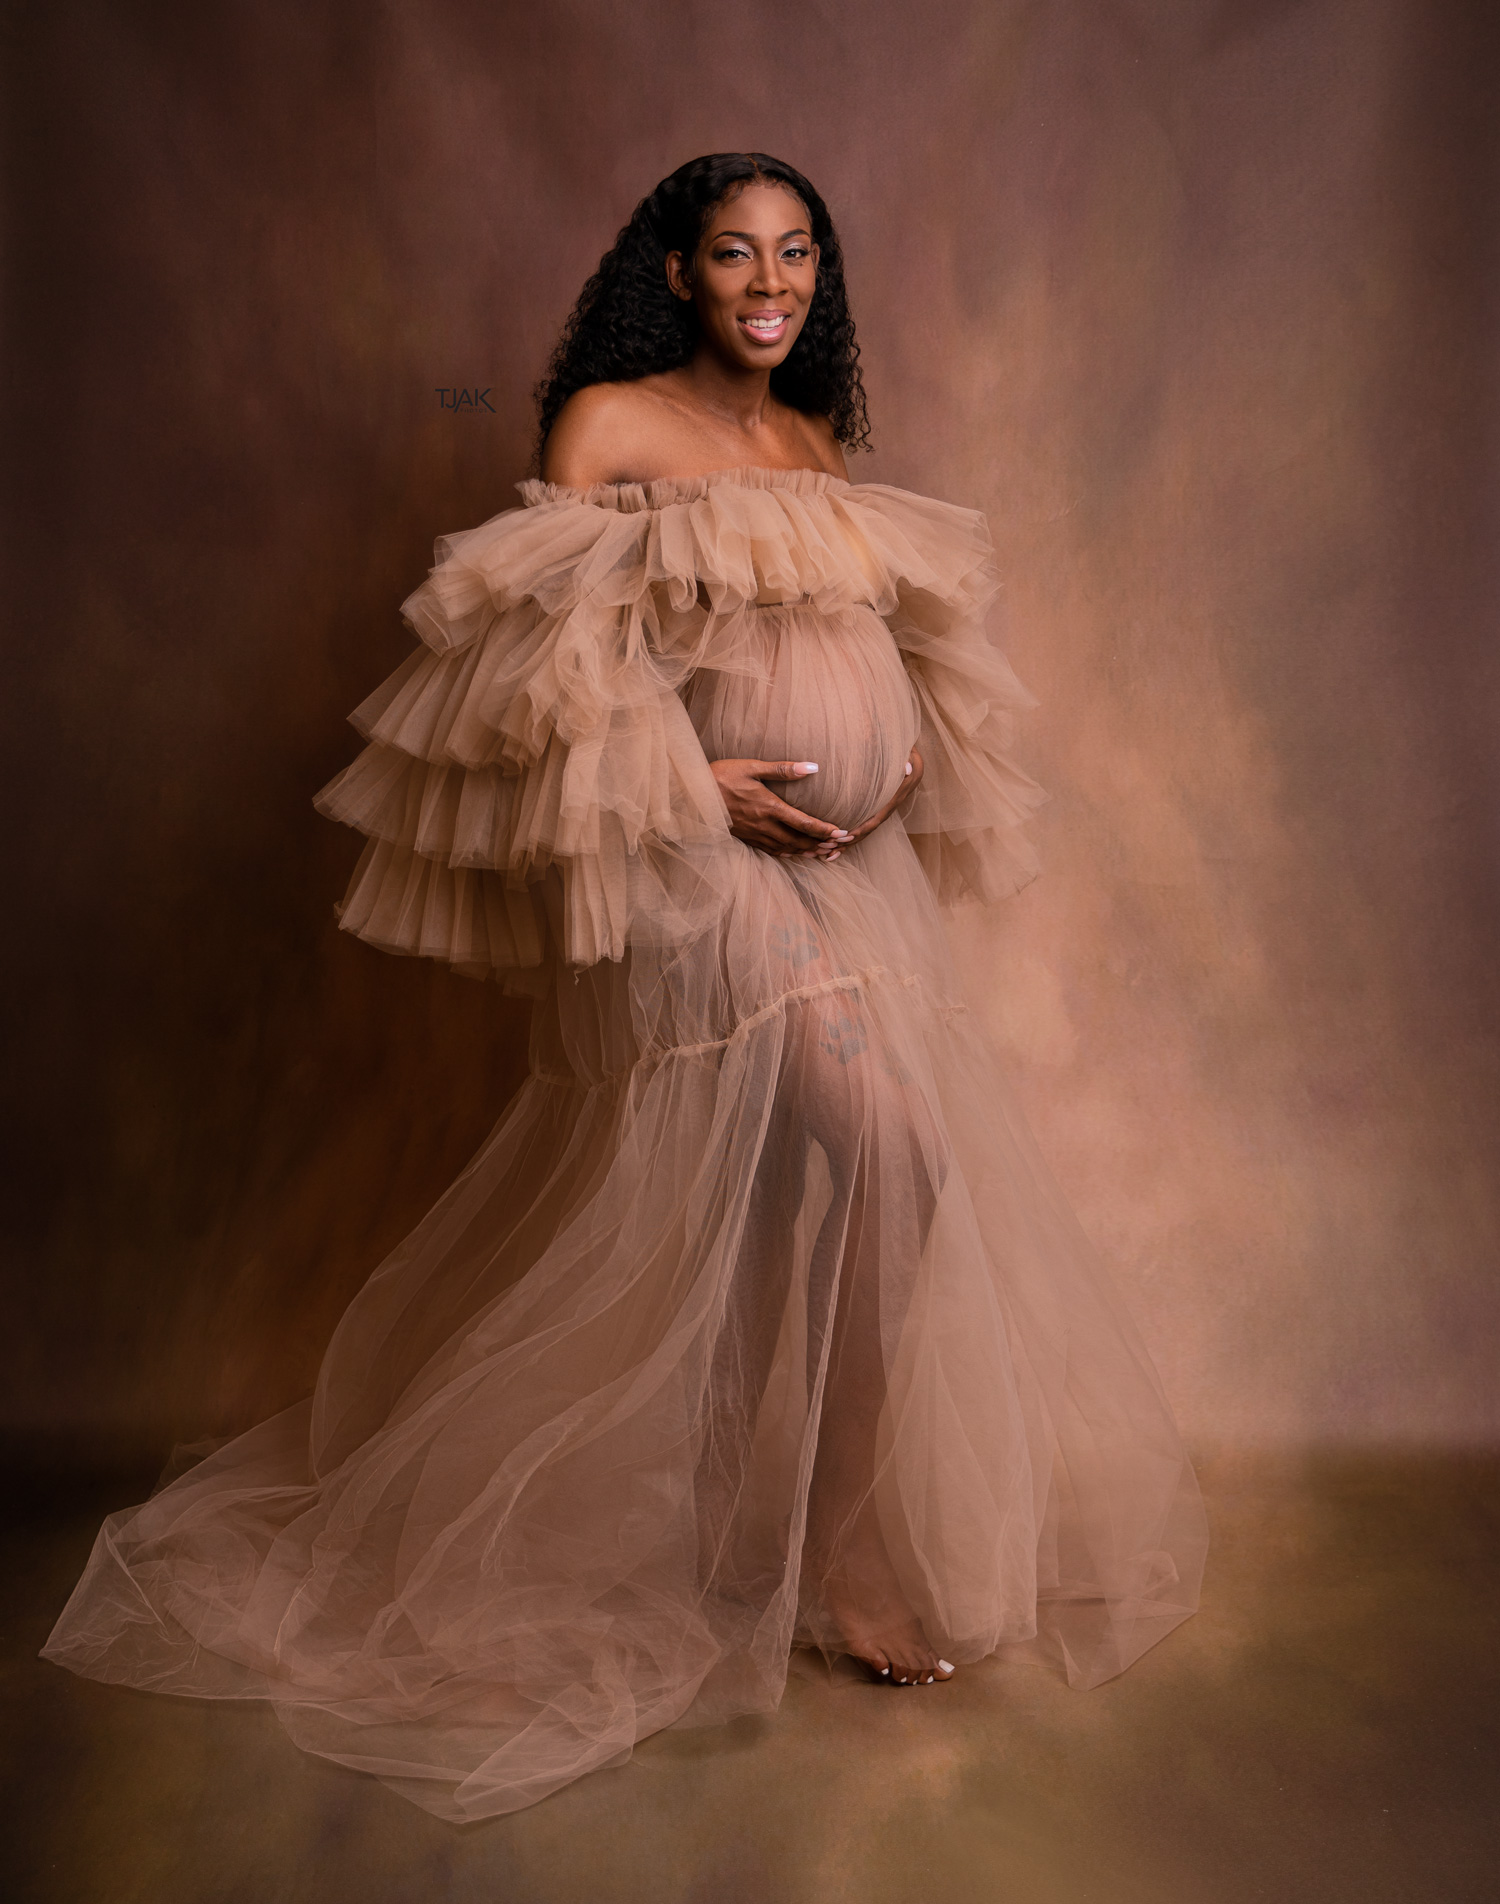 studio maternity photograph of a pregnant woman in Laurel Maryland near Baltimore MD